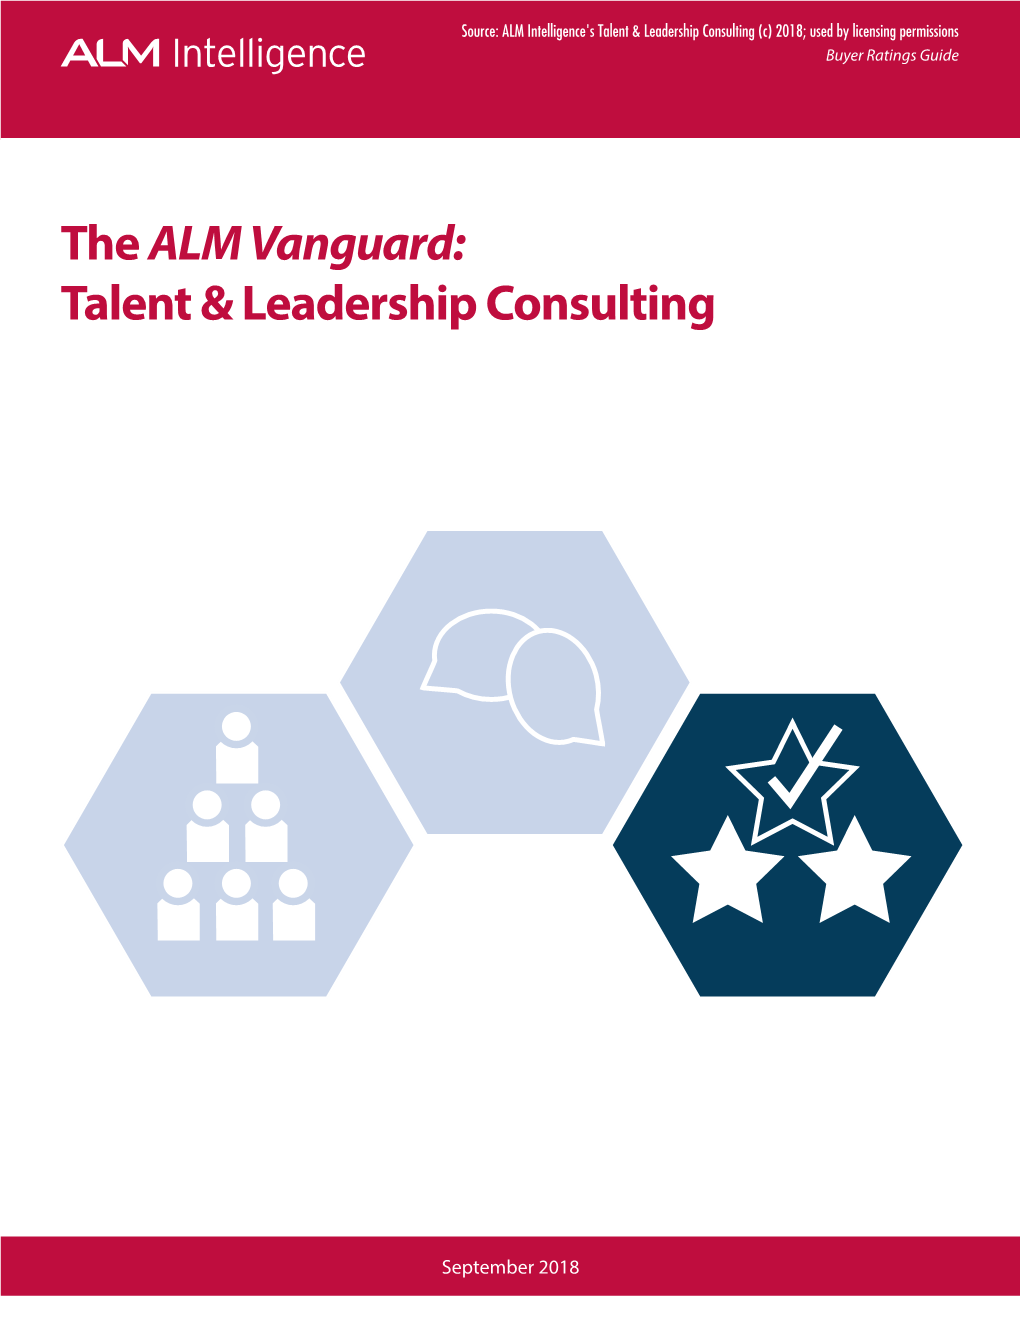 The ALM Vanguard: Talent & Leadership Consulting